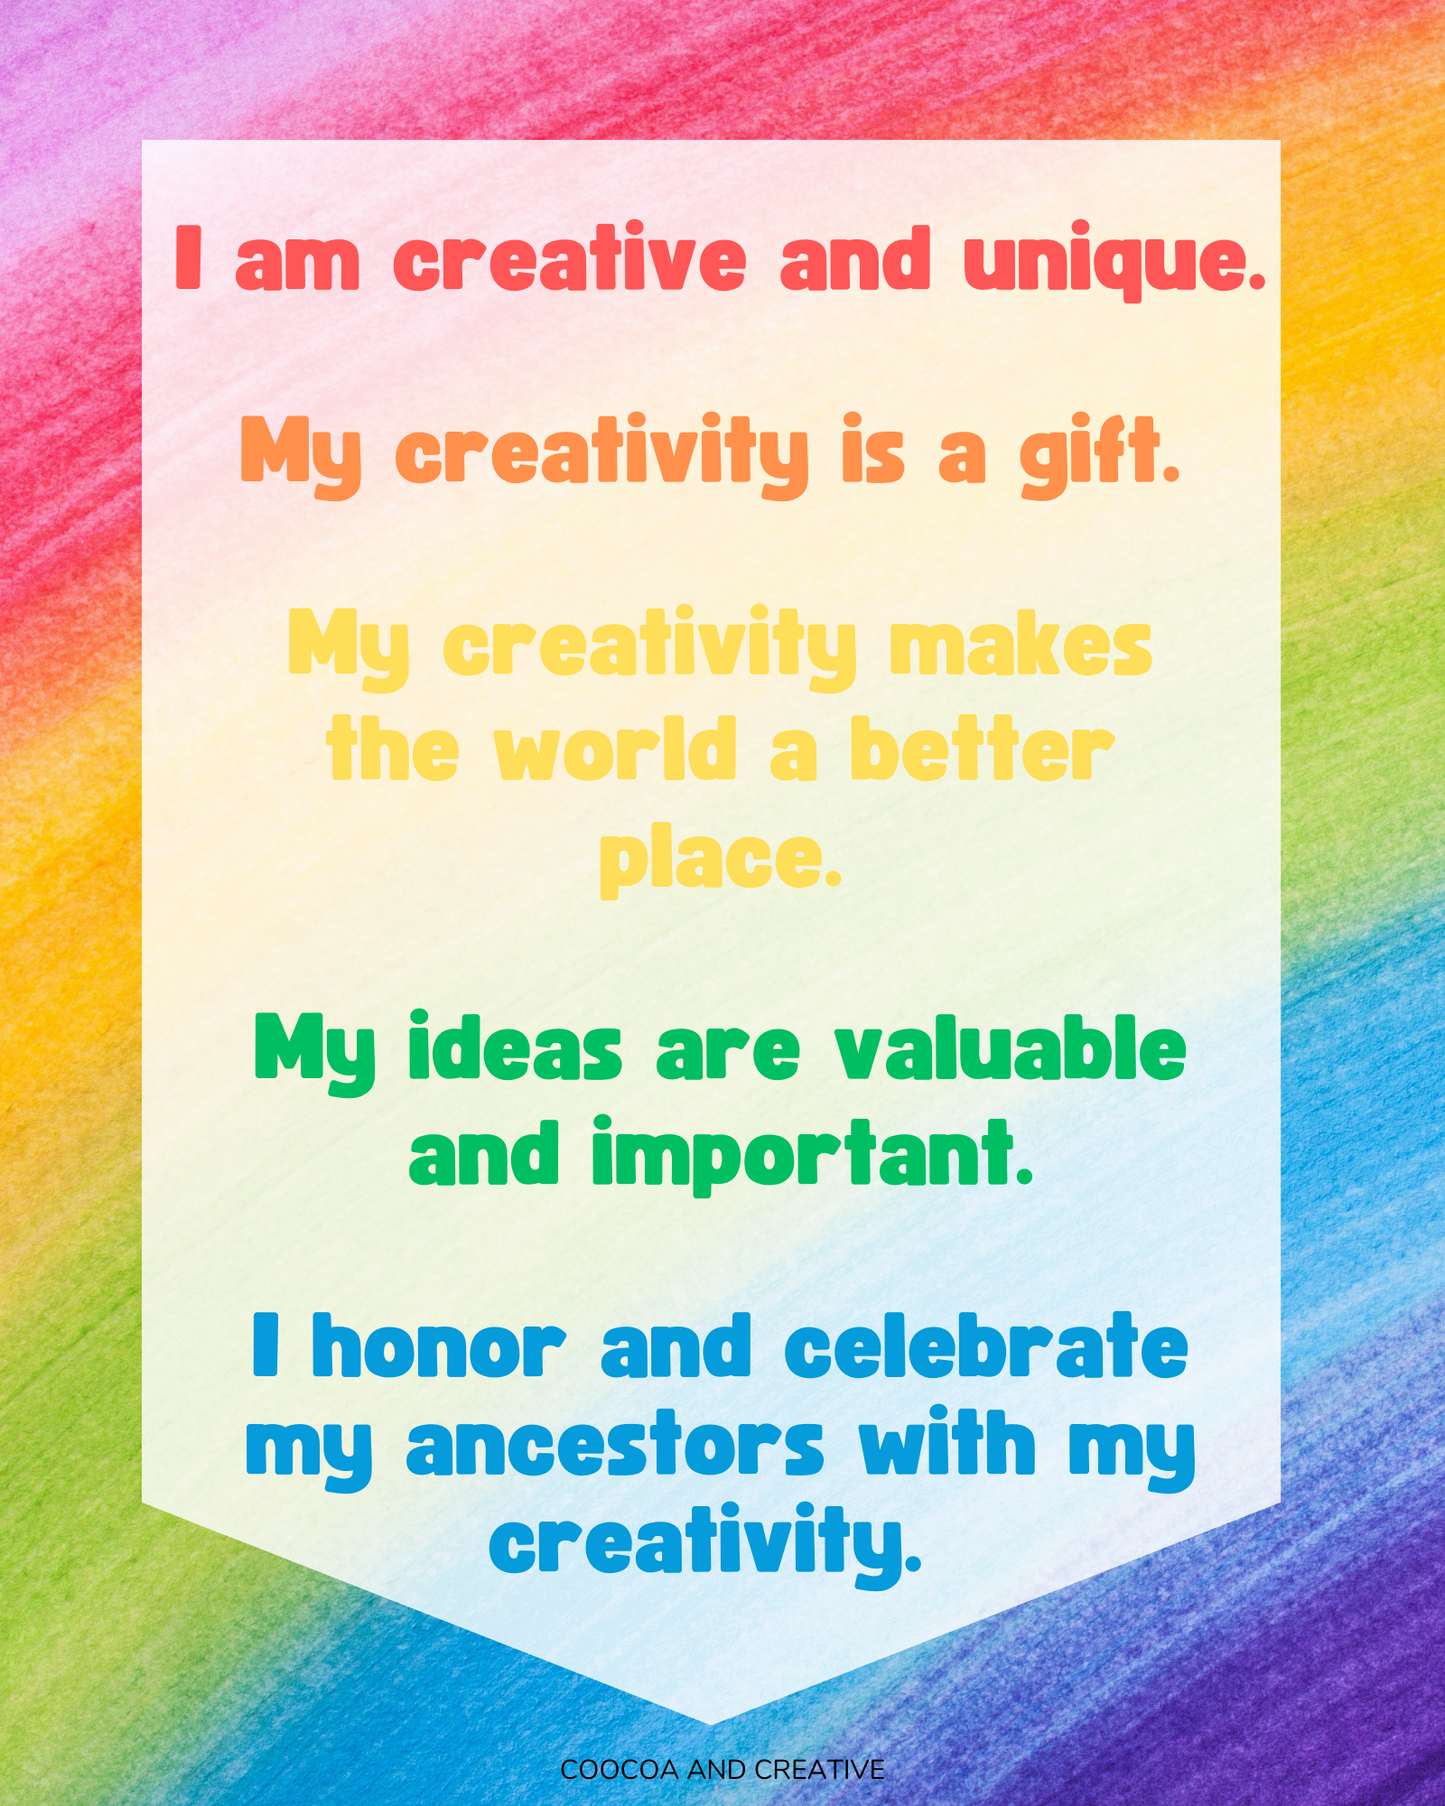 Cocoa and Creative Affirmation Posters FREEBIE